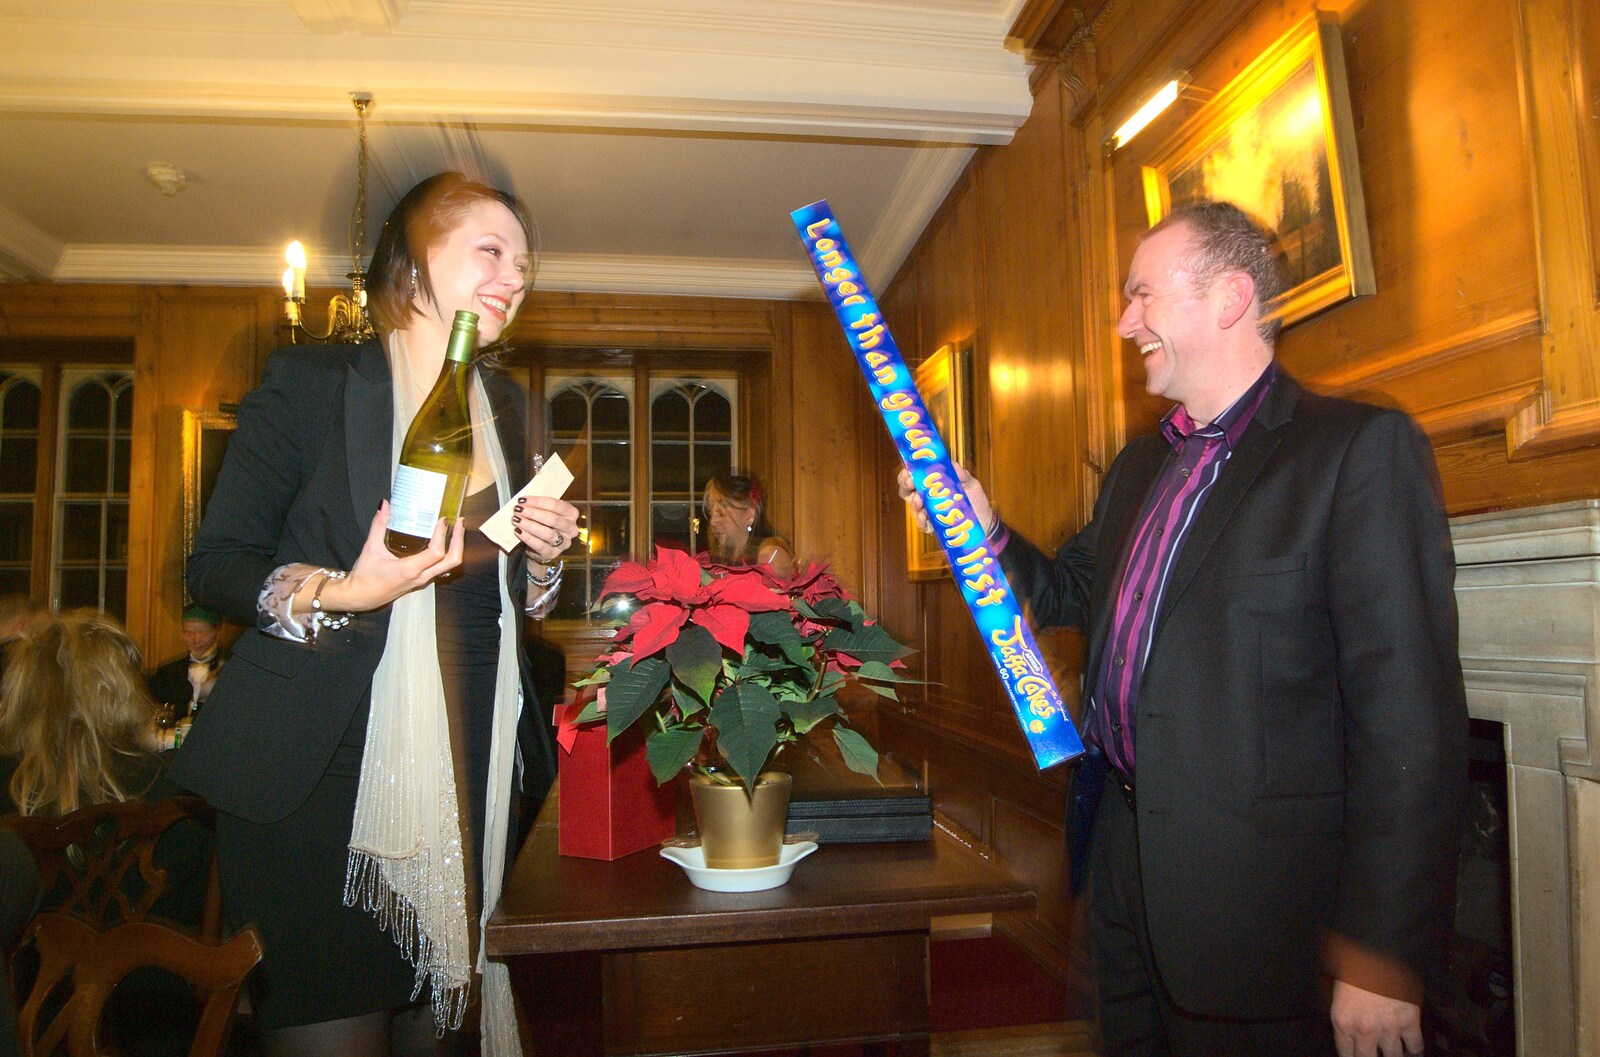 James waves a round a giant packet of Jaffa Cakes from A Qualcomm Christmas, Christ's College, Cambridge - 8th December 2011